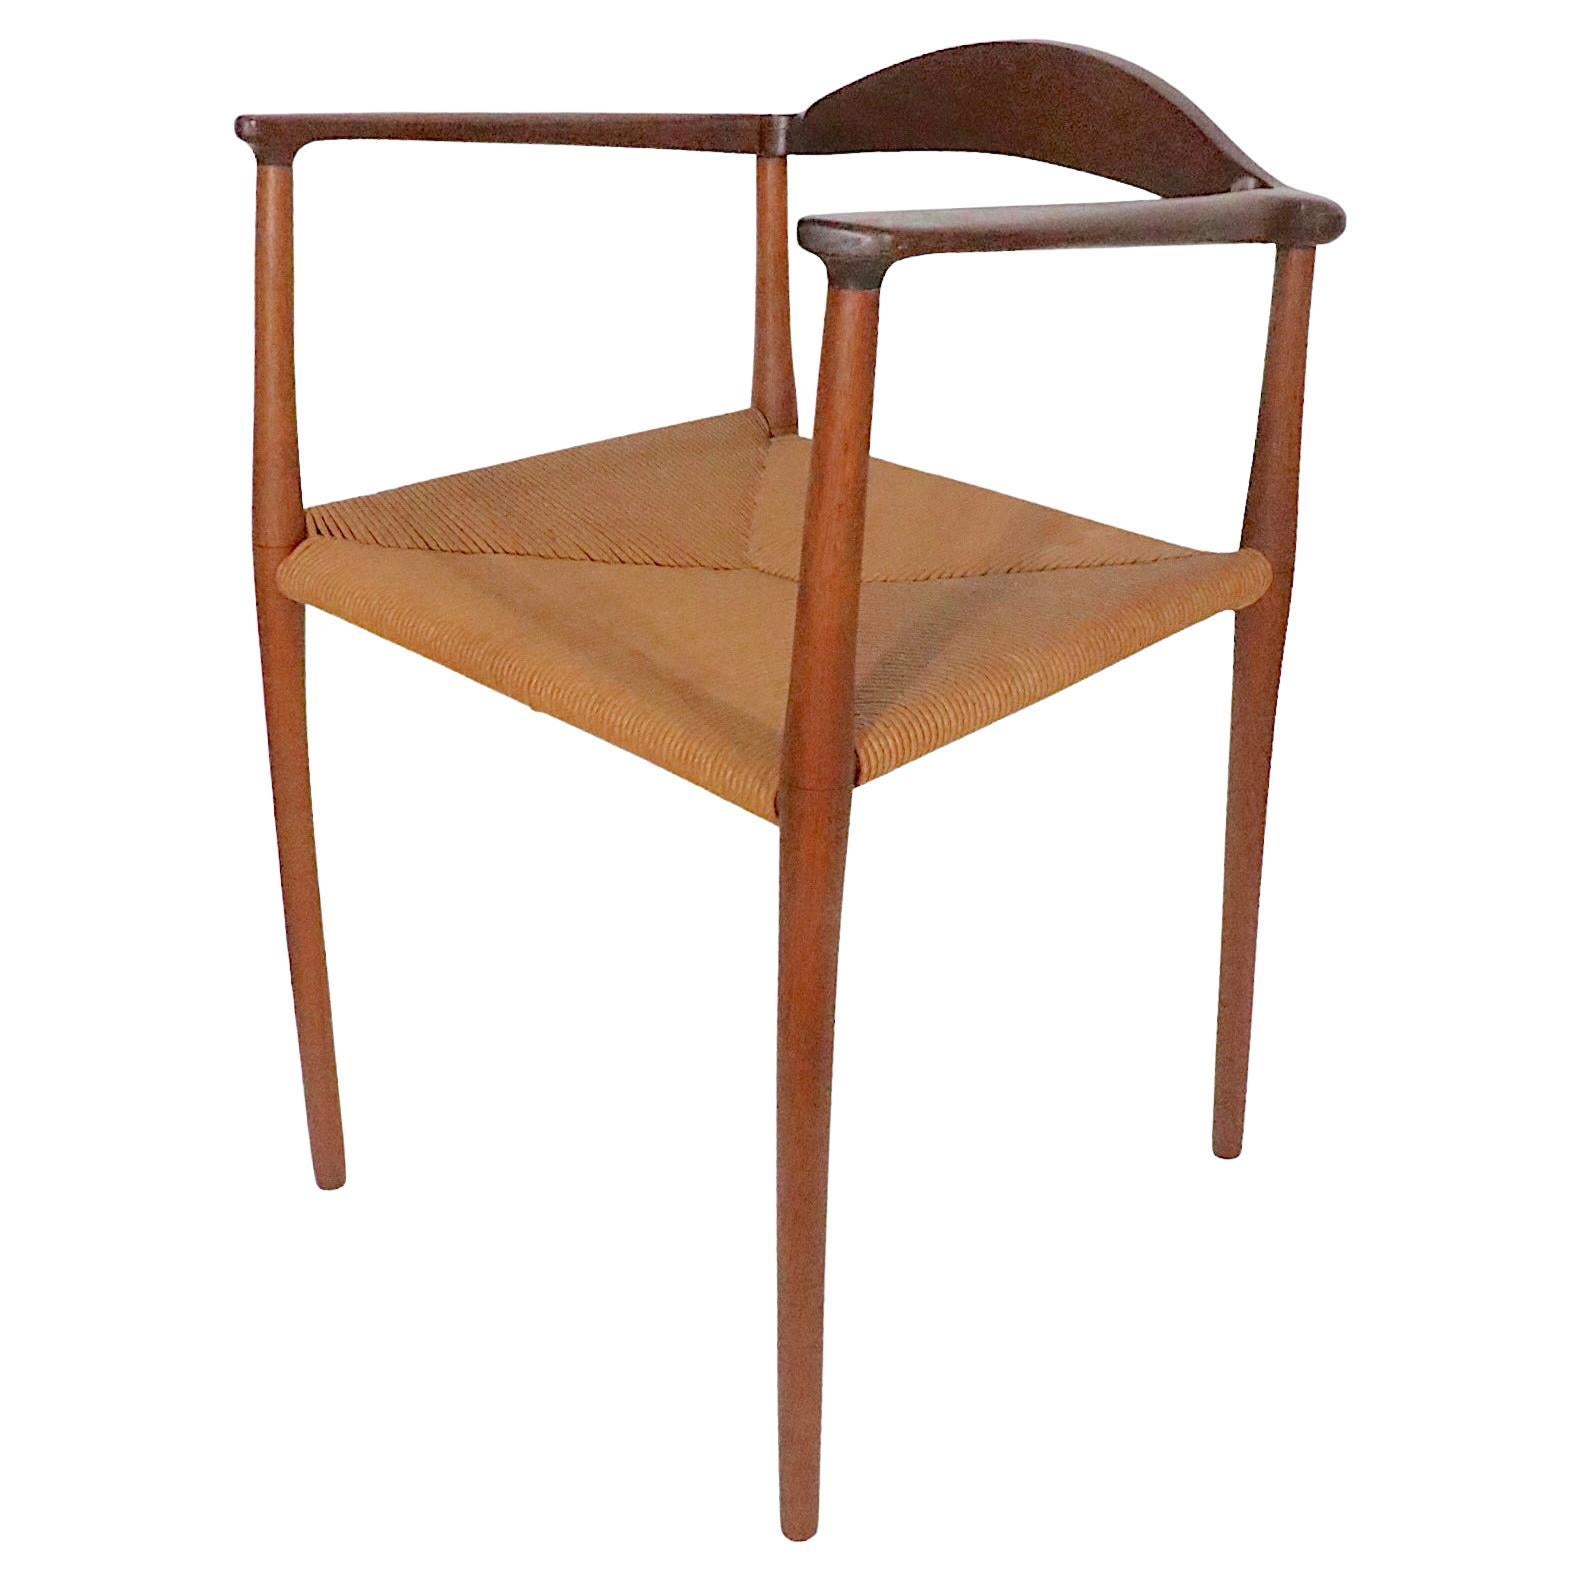 Mid Century Danish Modern Arm Dining Chair in Walnut with Rope Seat, circa 1950s